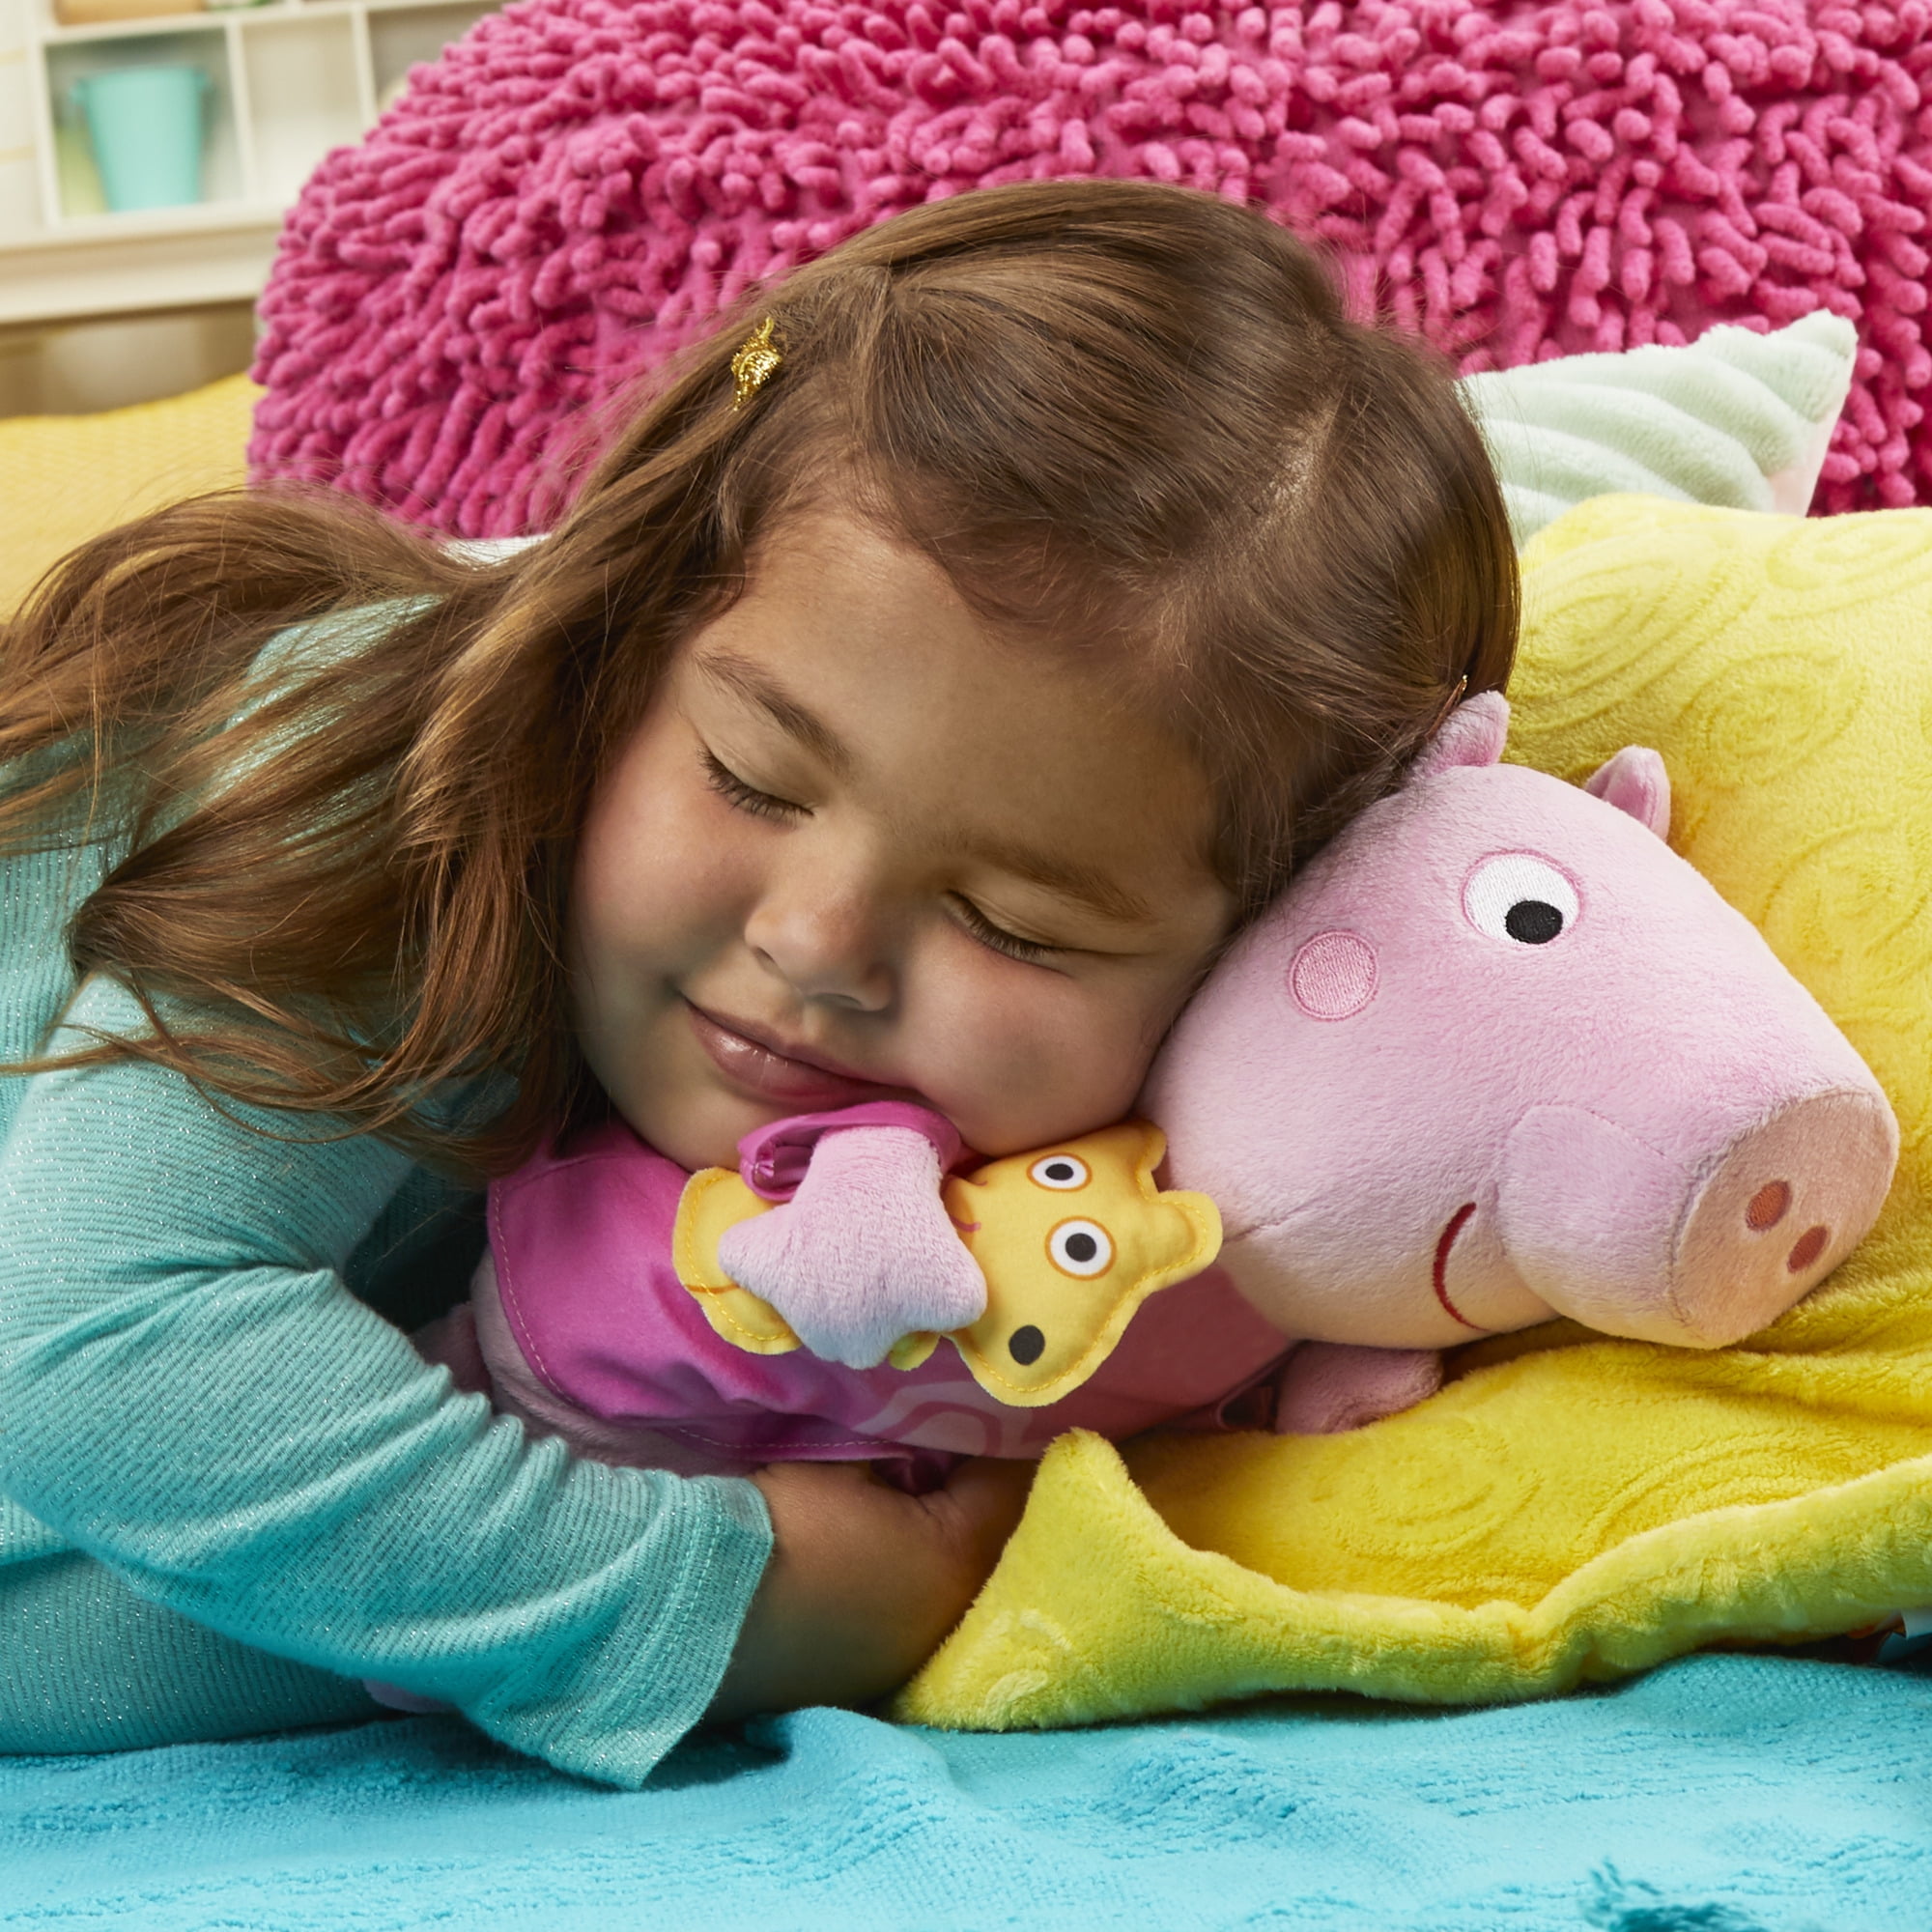  Peppa Pig Sleep N' Oink Plush Stuffed Animal Toy, Large 12 -  Press Peppa's Belly to Hear Phrases, Snores & Lullaby - Toy Gift for Kids -  Ages 18+ Months : Toys & Games